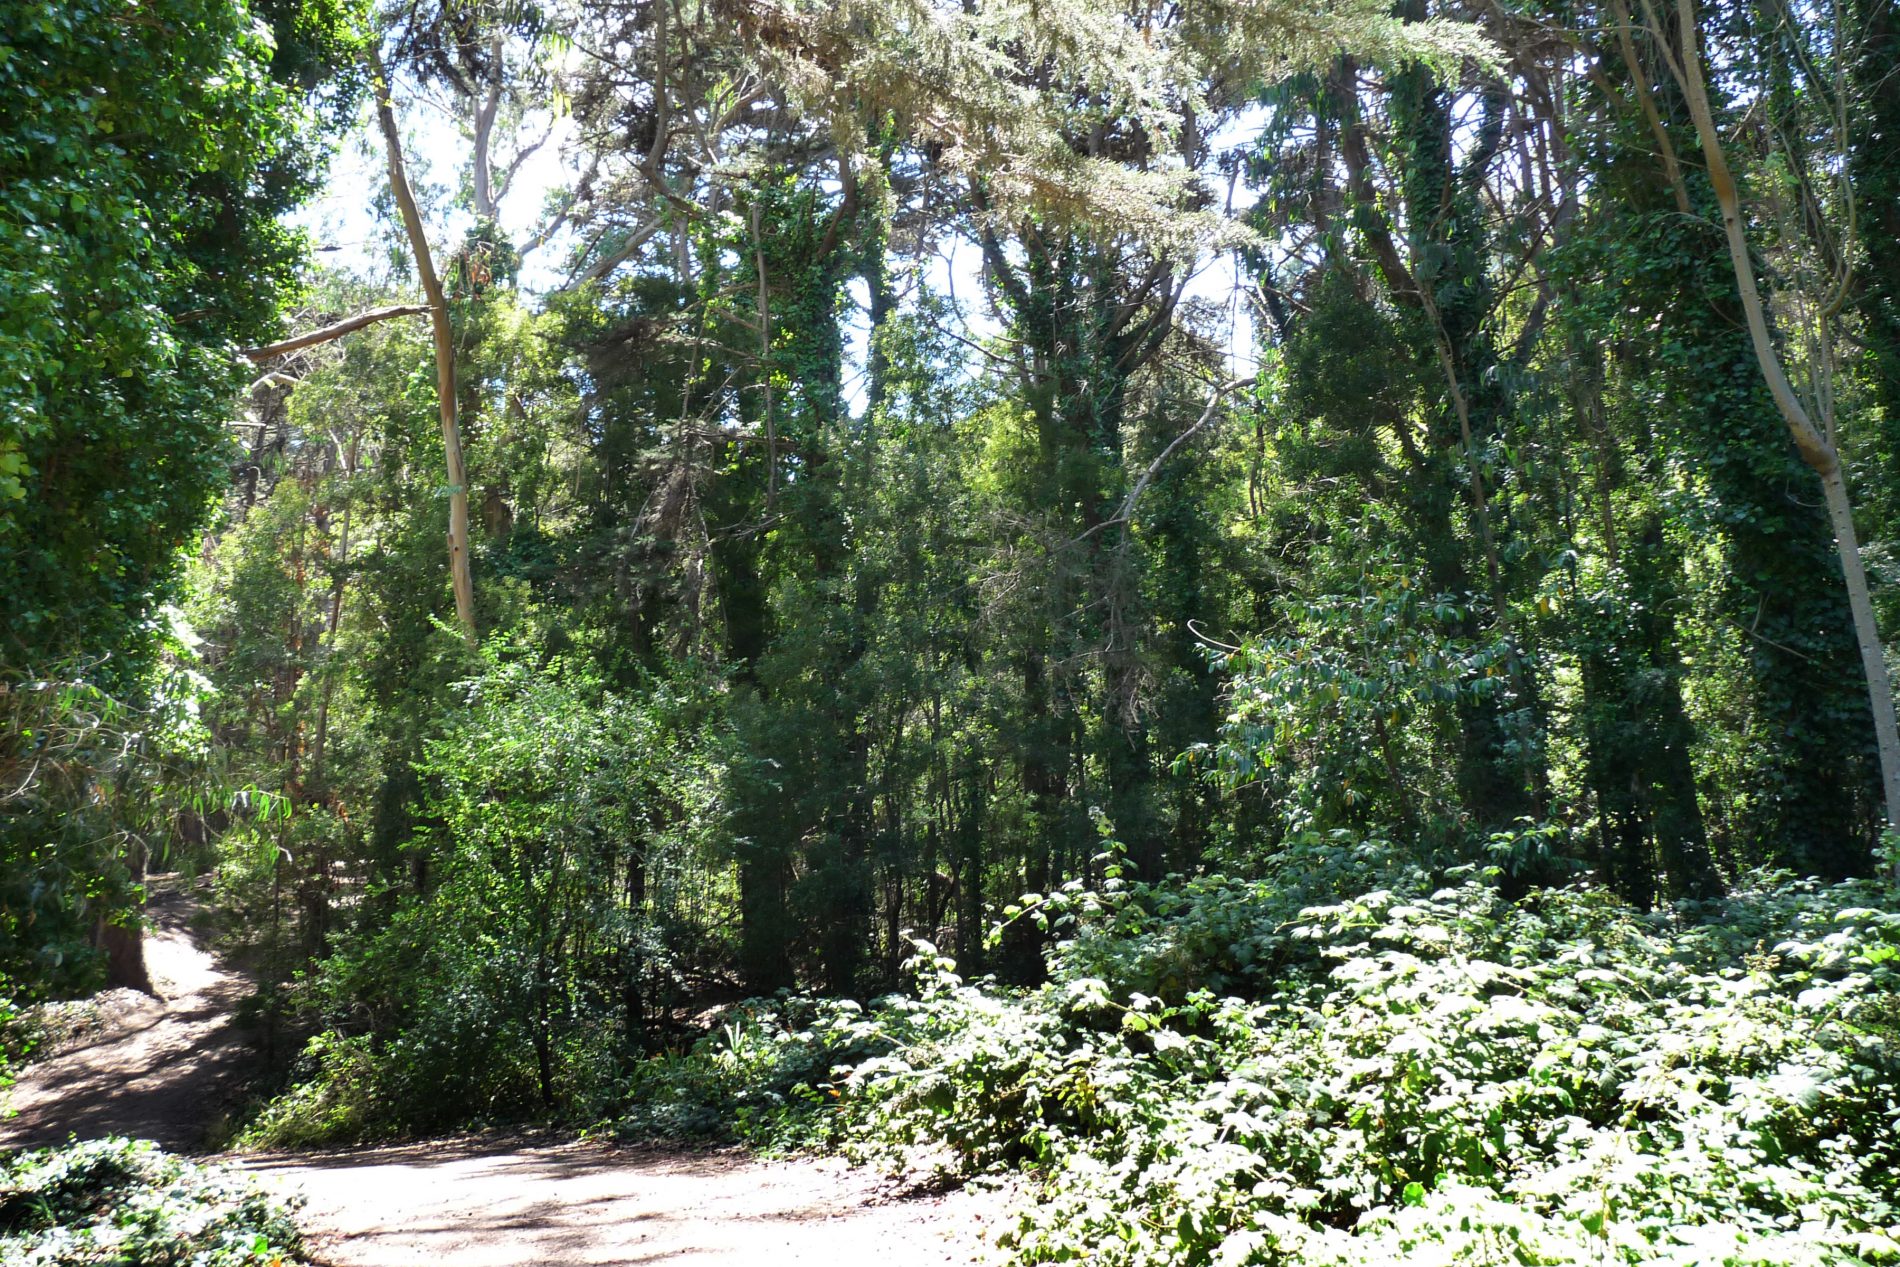 Dense wooded area along the Ecology Trail in Presidio National Park.